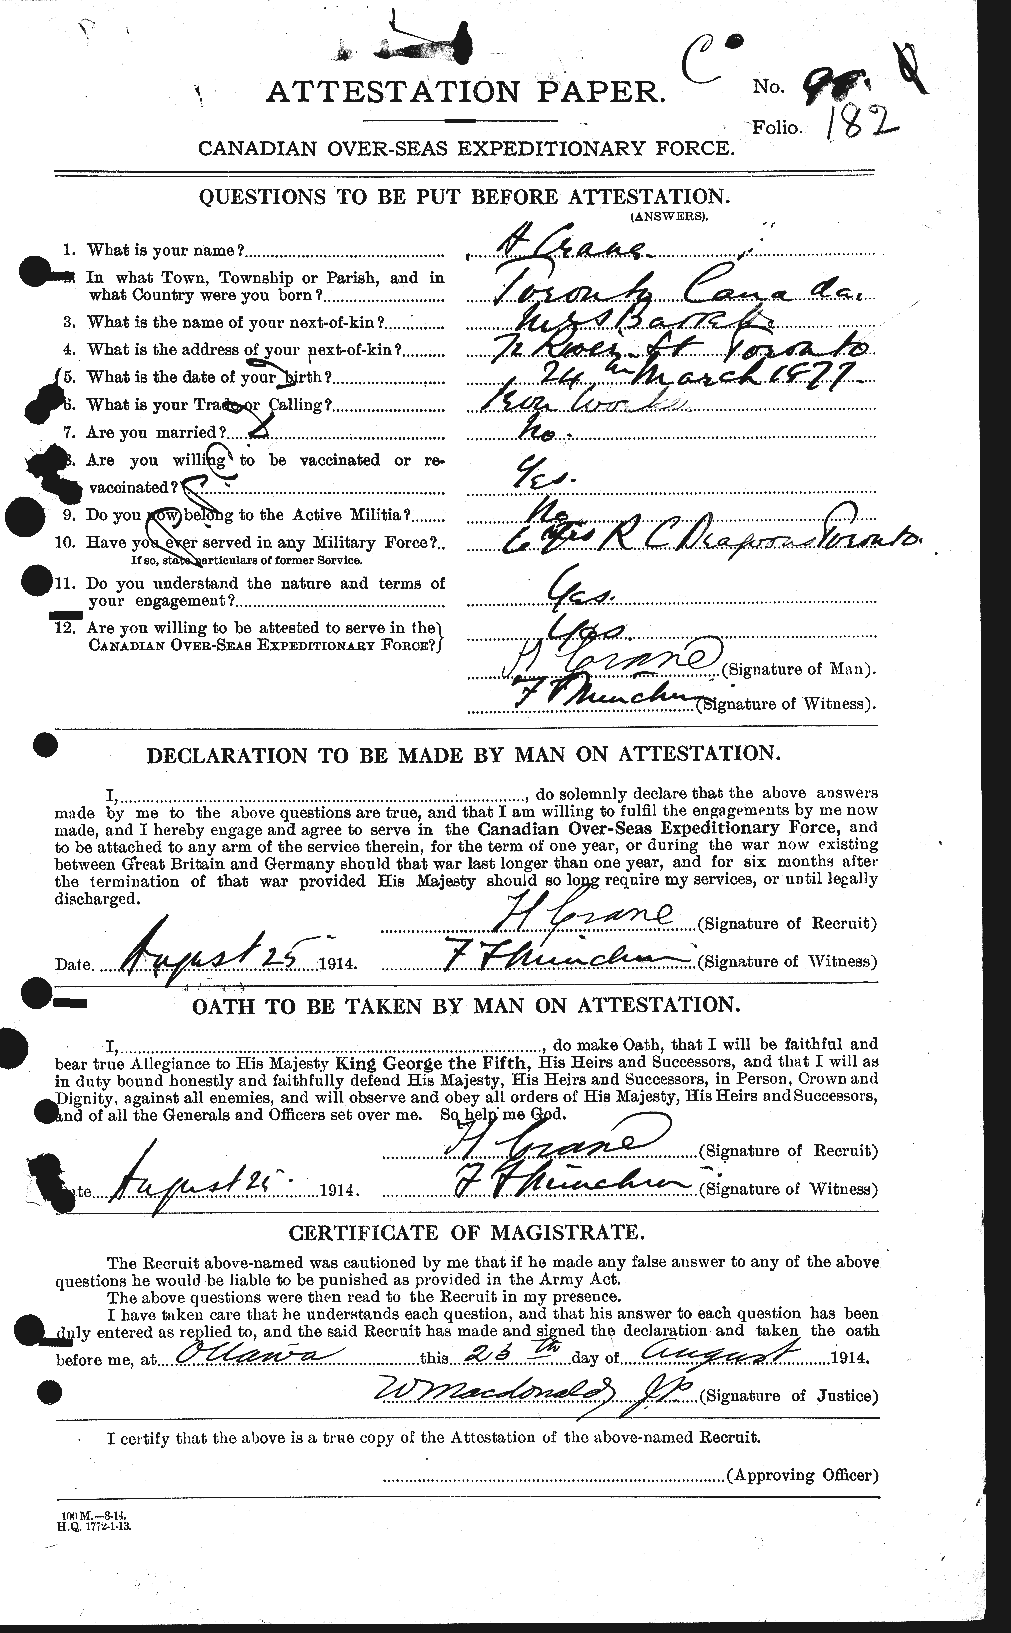 Personnel Records of the First World War - CEF 062004a